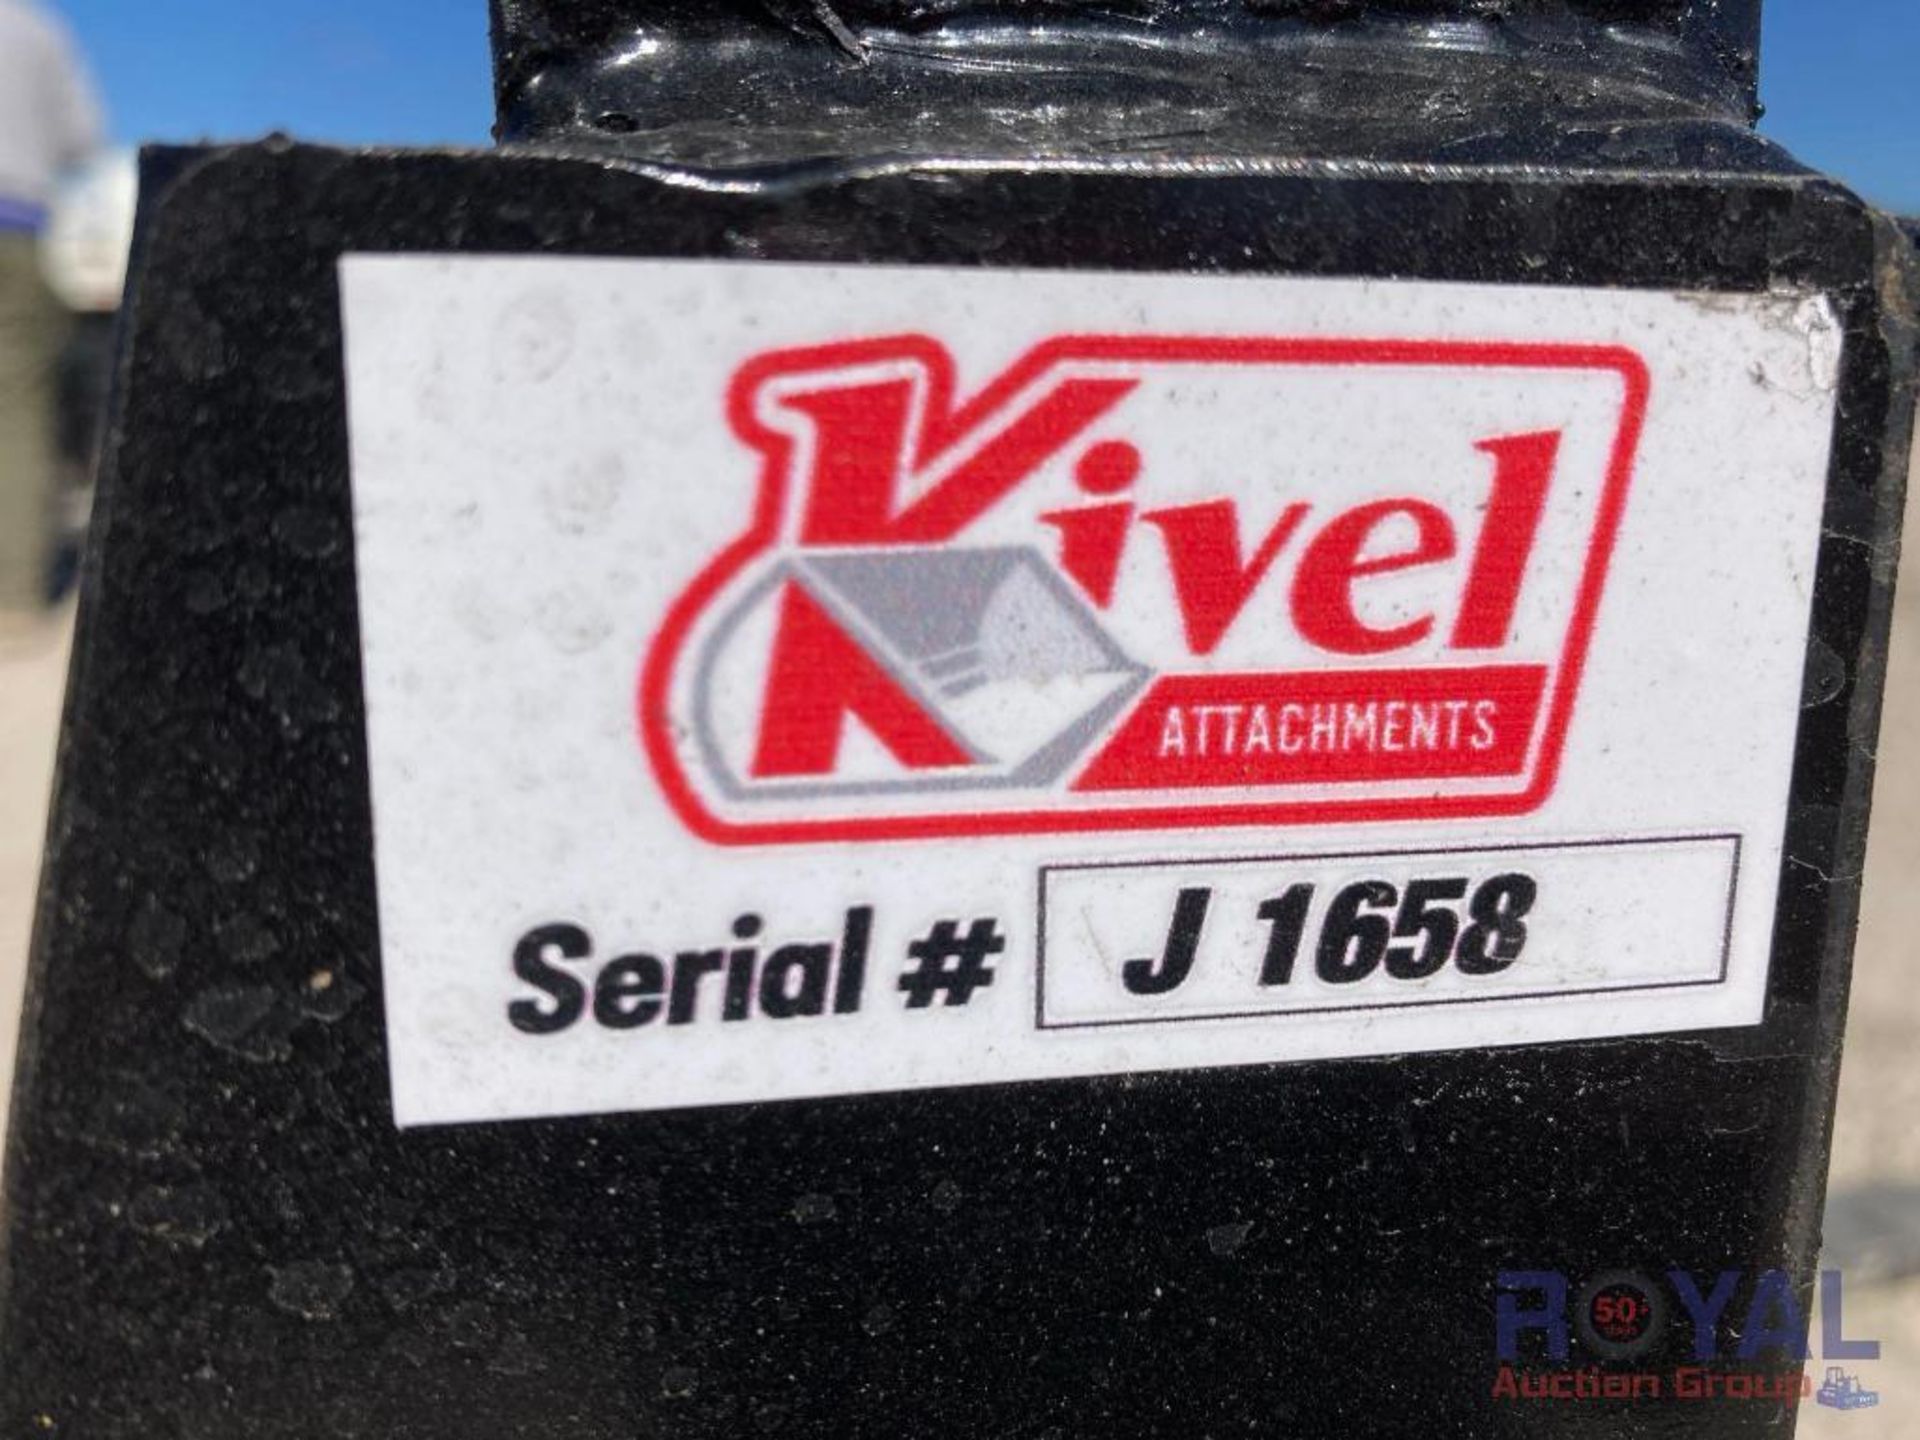 2023 Kivel 4200lbs 48in Fork Skid Steer Attachments - Image 6 of 6